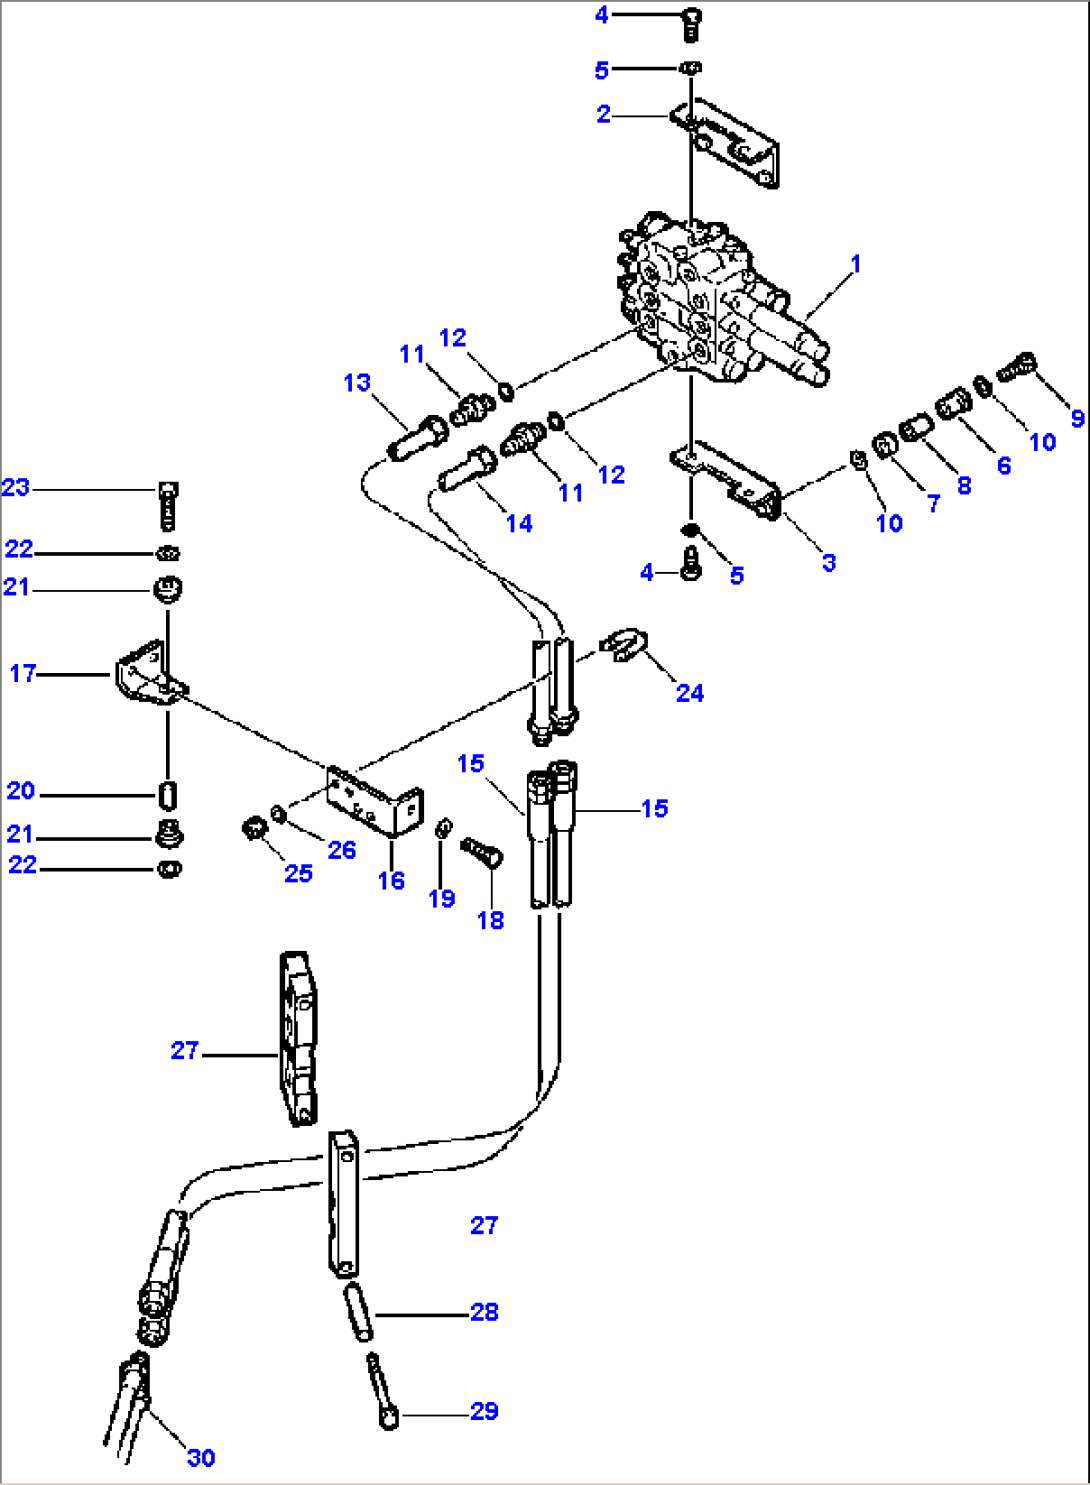 HYDRAULIC PIPING (FRONT ATTACHMENT - CONTROL VALVE TO FRAME)